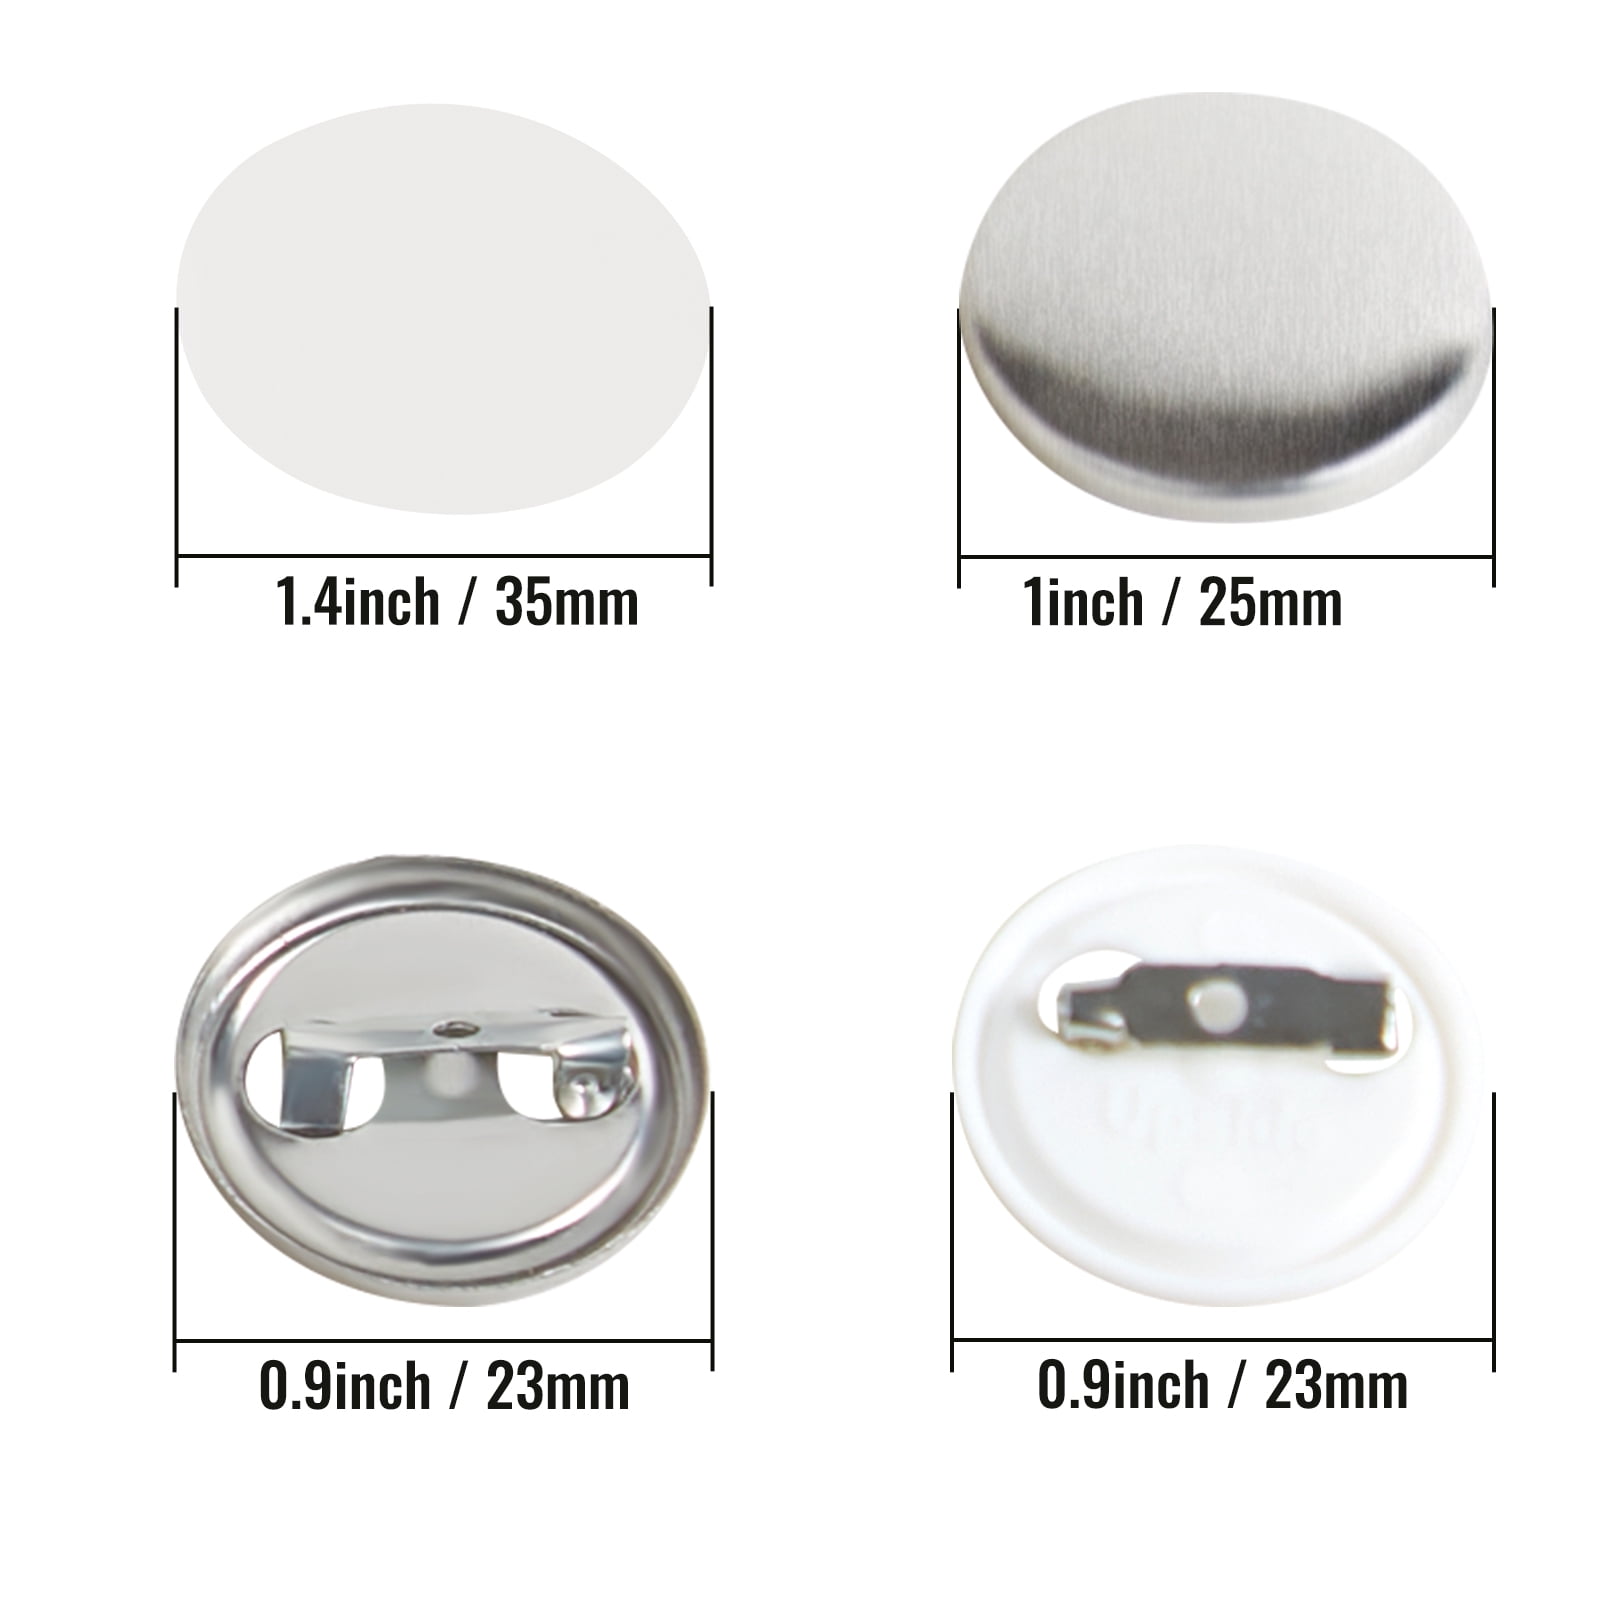 ChiButtons 25mm Metal Pin Badge Round (500Sets) Metric System